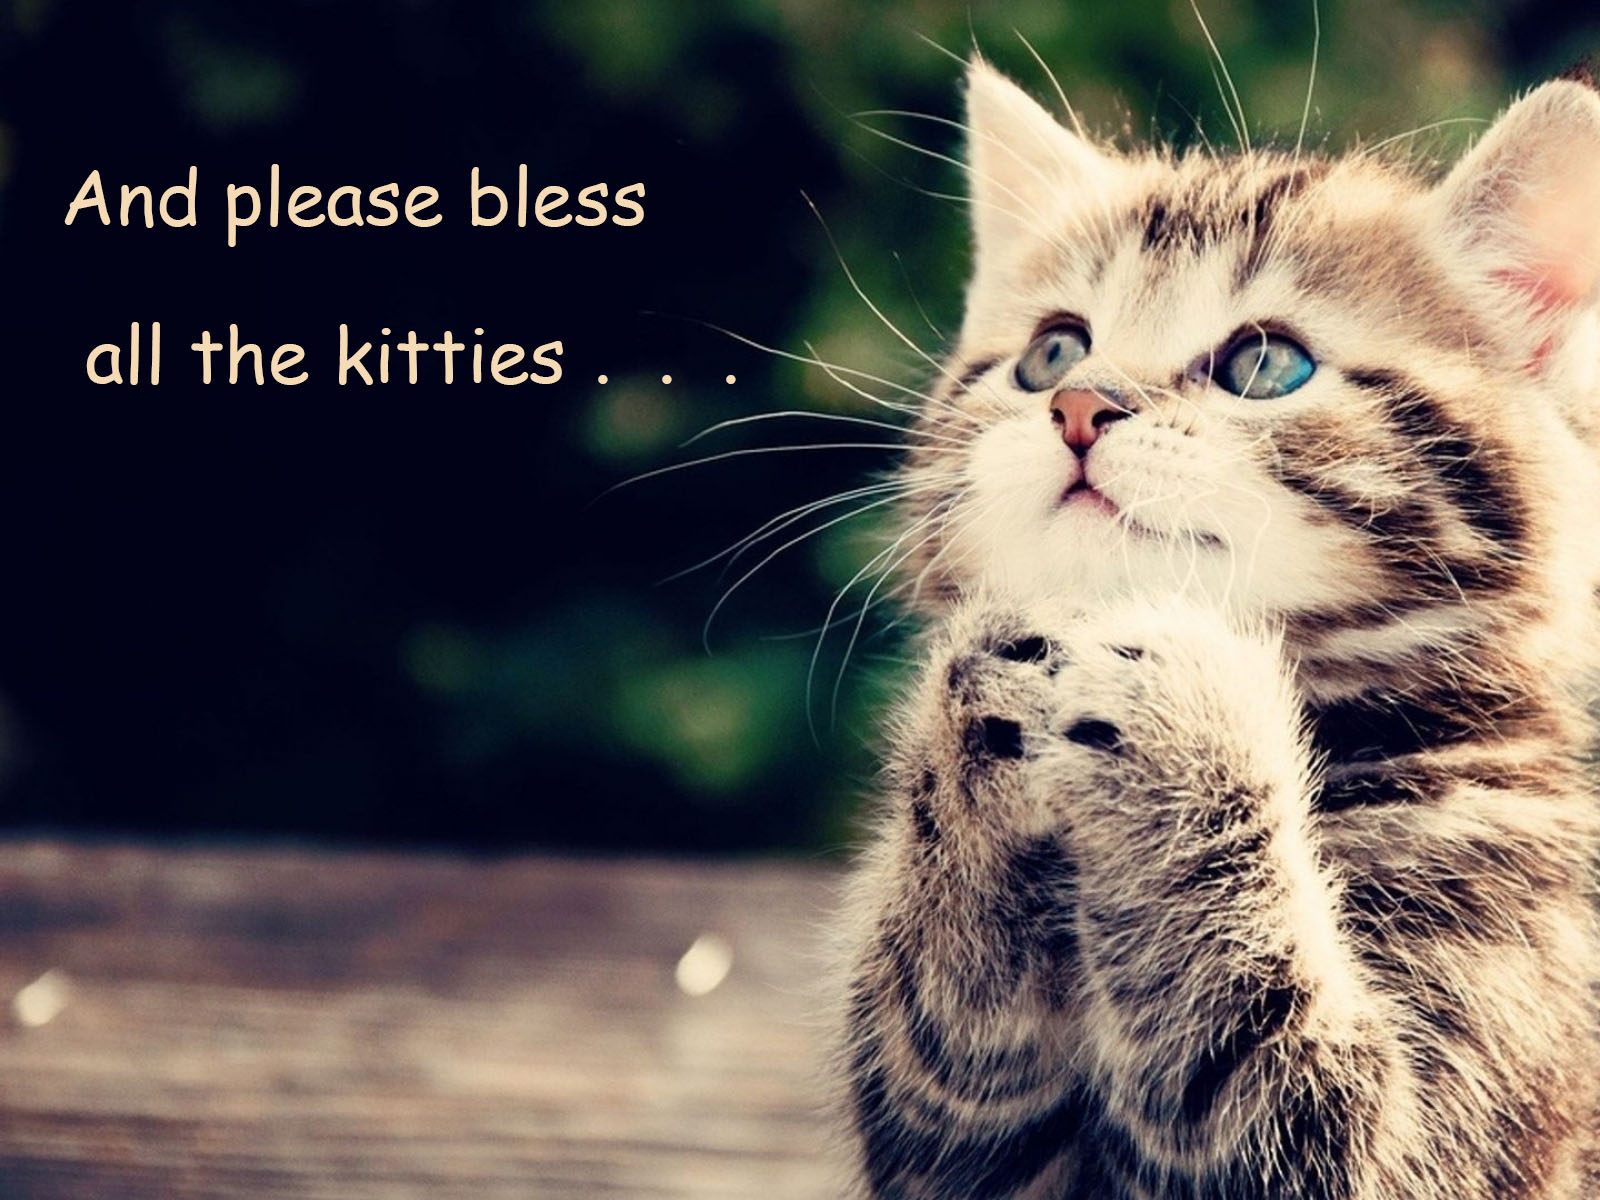 Kitty Praying for All the Kitties